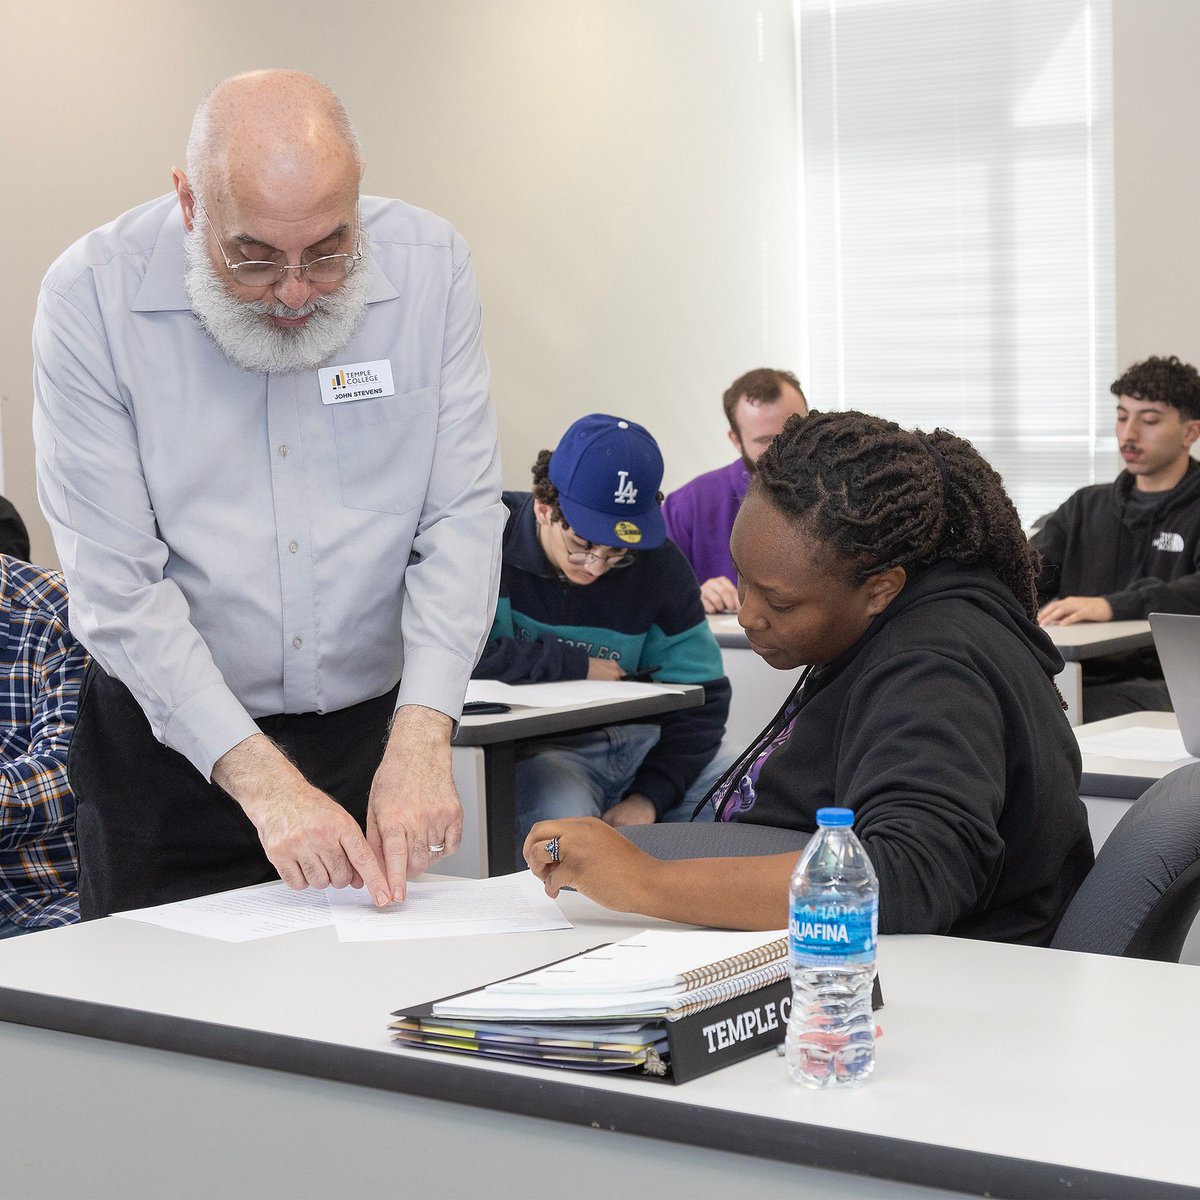 It's National Teacher Appreciation Day! We are so thankful for all of our Temple College Faculty who invest in the lives of their students! #YourCommunitysCollege #NationalTeacherAppreciationDay